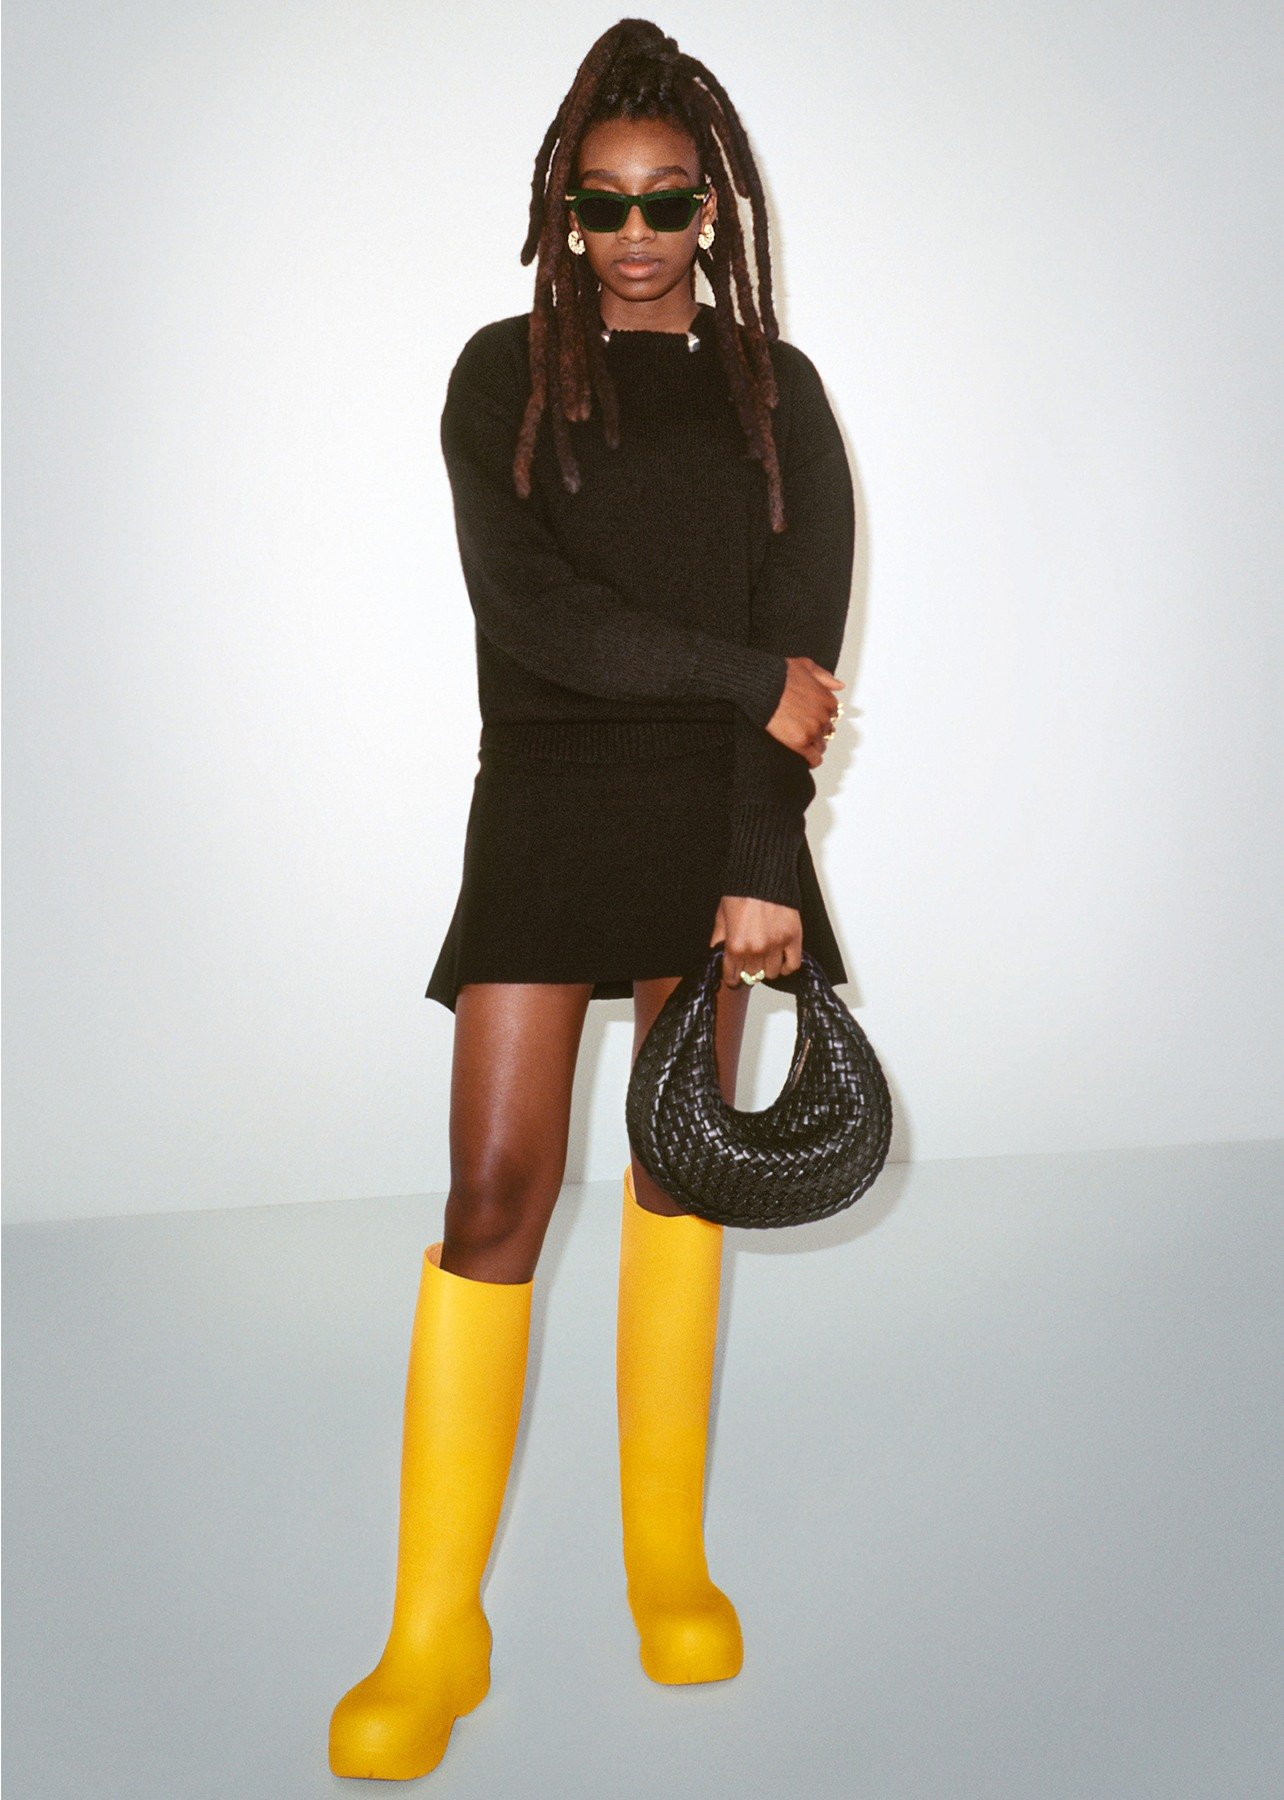 Model poses wearing a black sweater, black skirt, yellow knee-high rubber boots and holding a black woven top handle bag